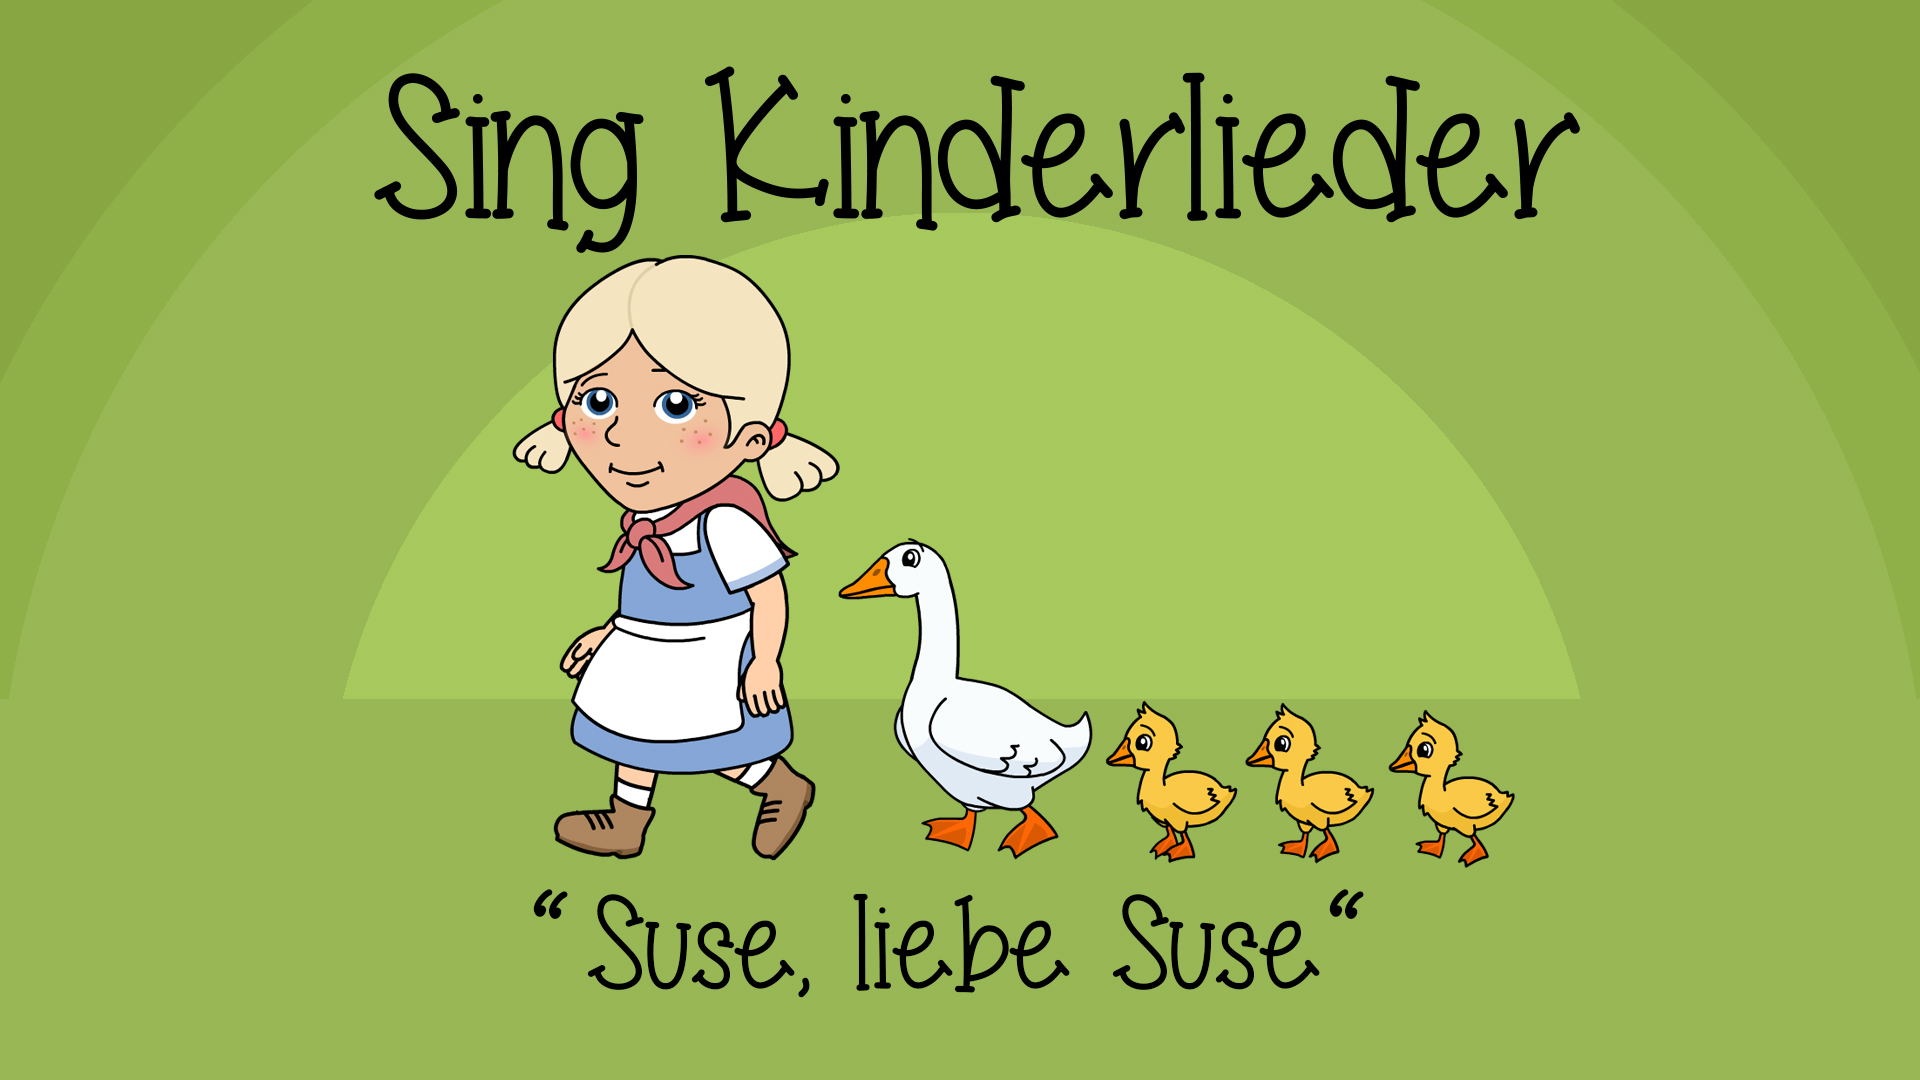 Suse, liebe Suse